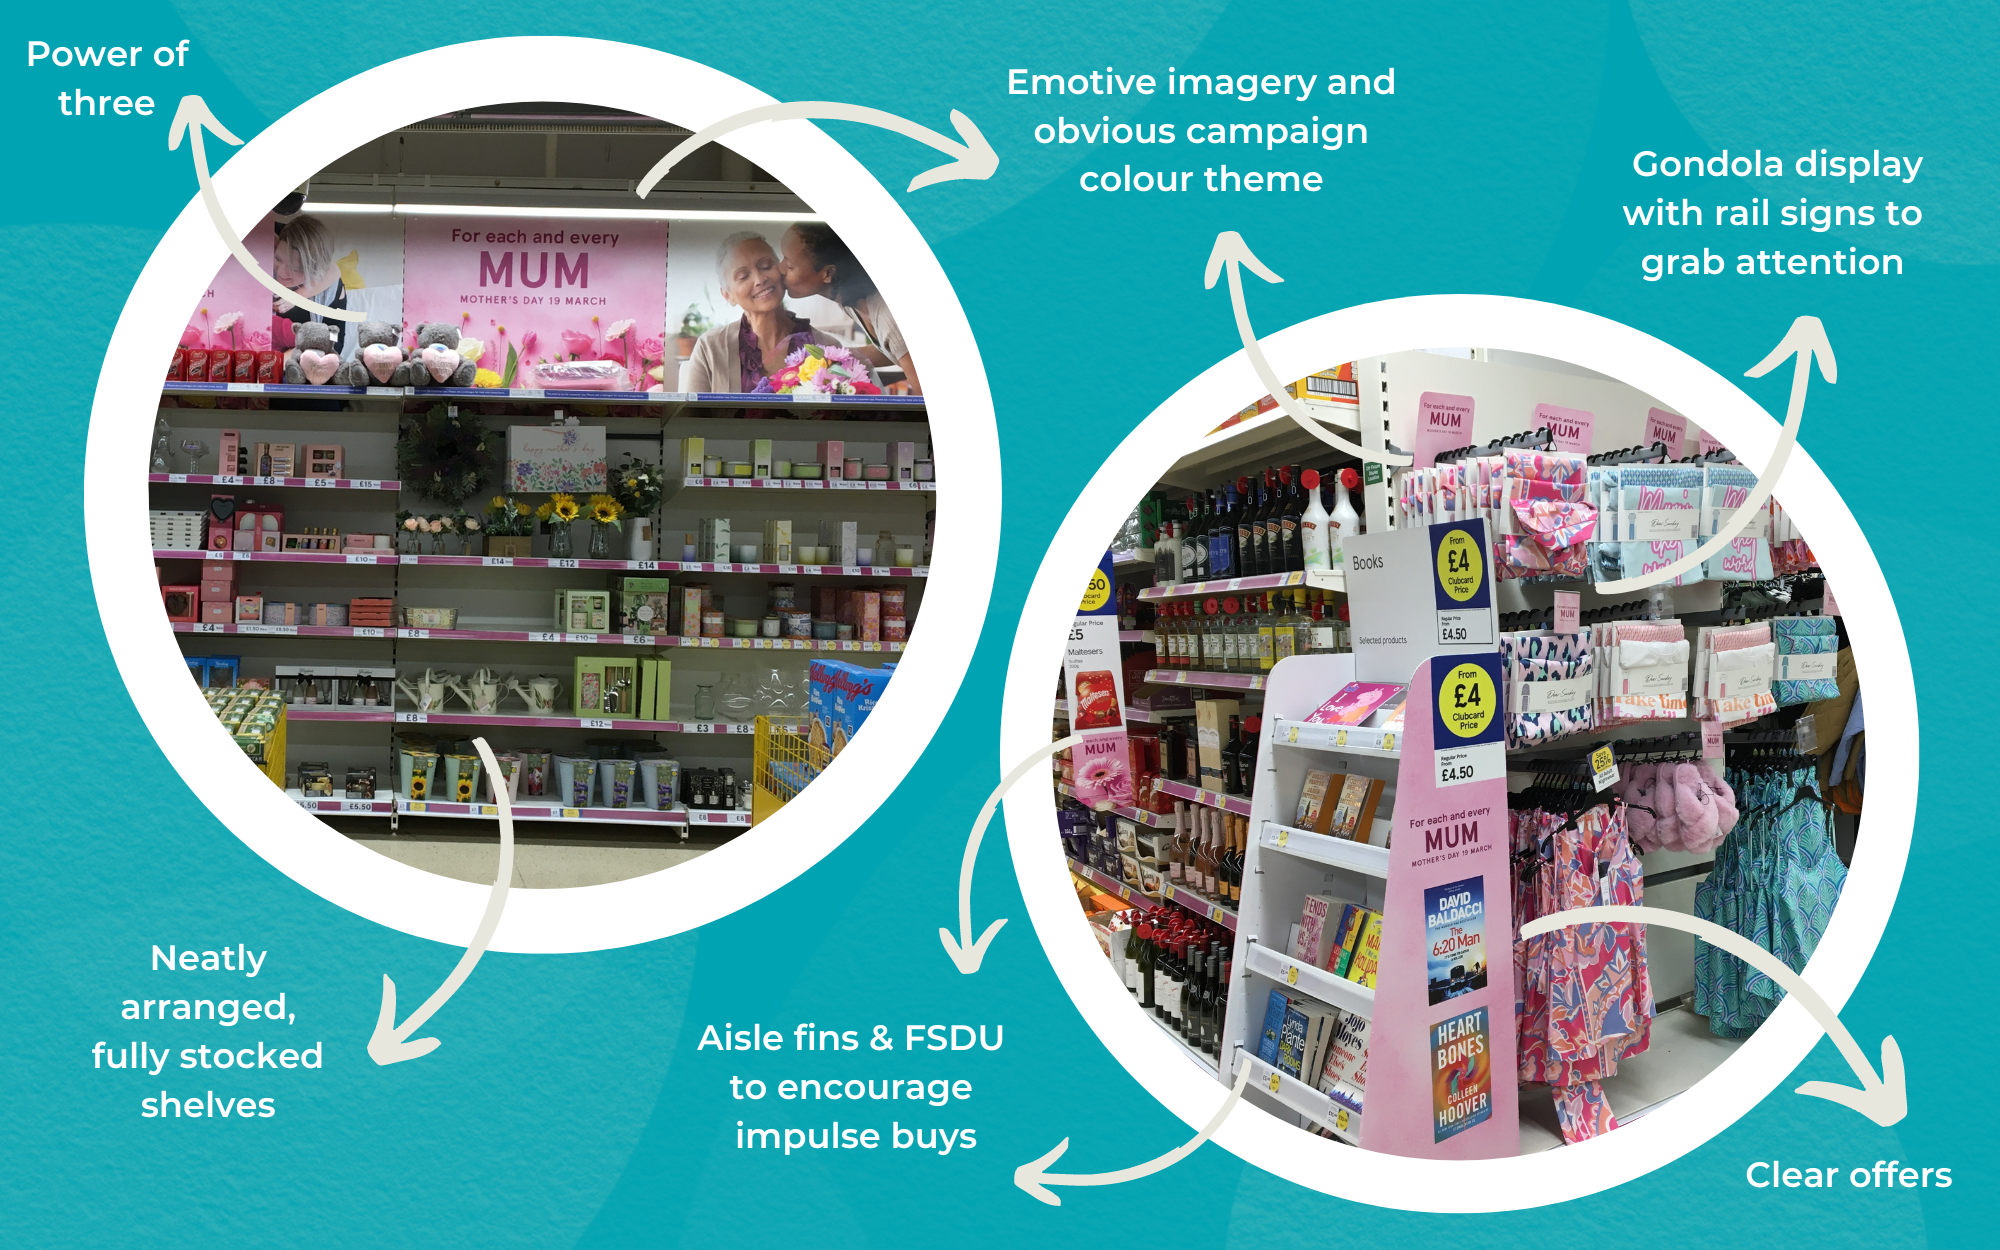 A Mother's Day retail display showing emotive imagery, neatly arranged stock on shelves, aisle fins, FSDUs, clear offers and a gondola display.